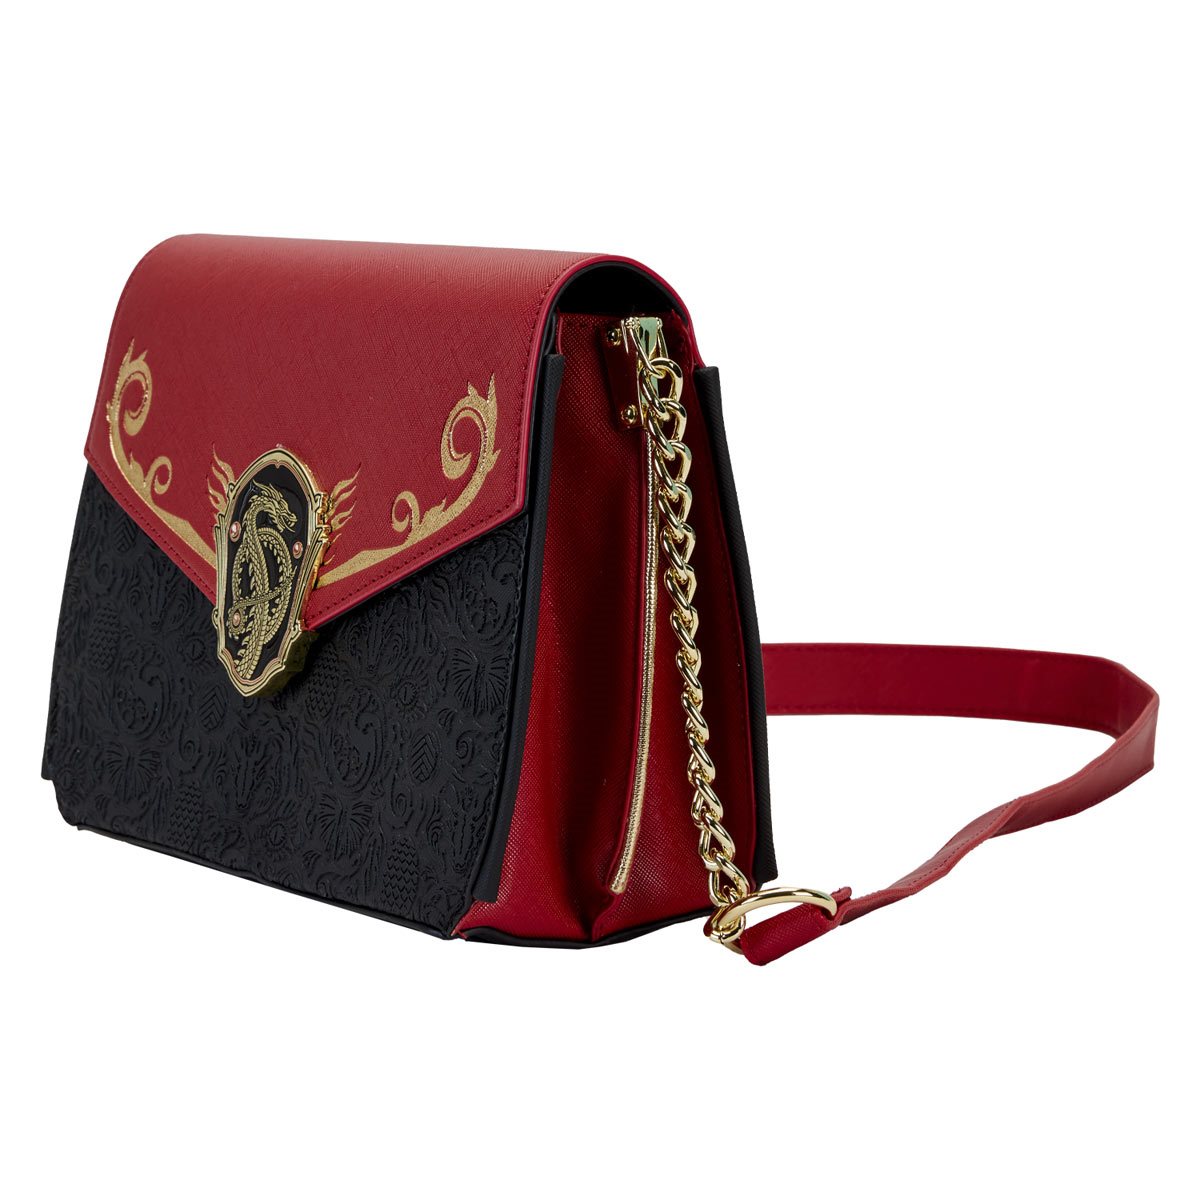 Movie GAME OF THRONES Wallet Leather Billetera Targaryen Blood And Fire  Dragon Wallets For Boys Girls Money Bag Purse From Fashion710, $34.67 |  DHgate.Com